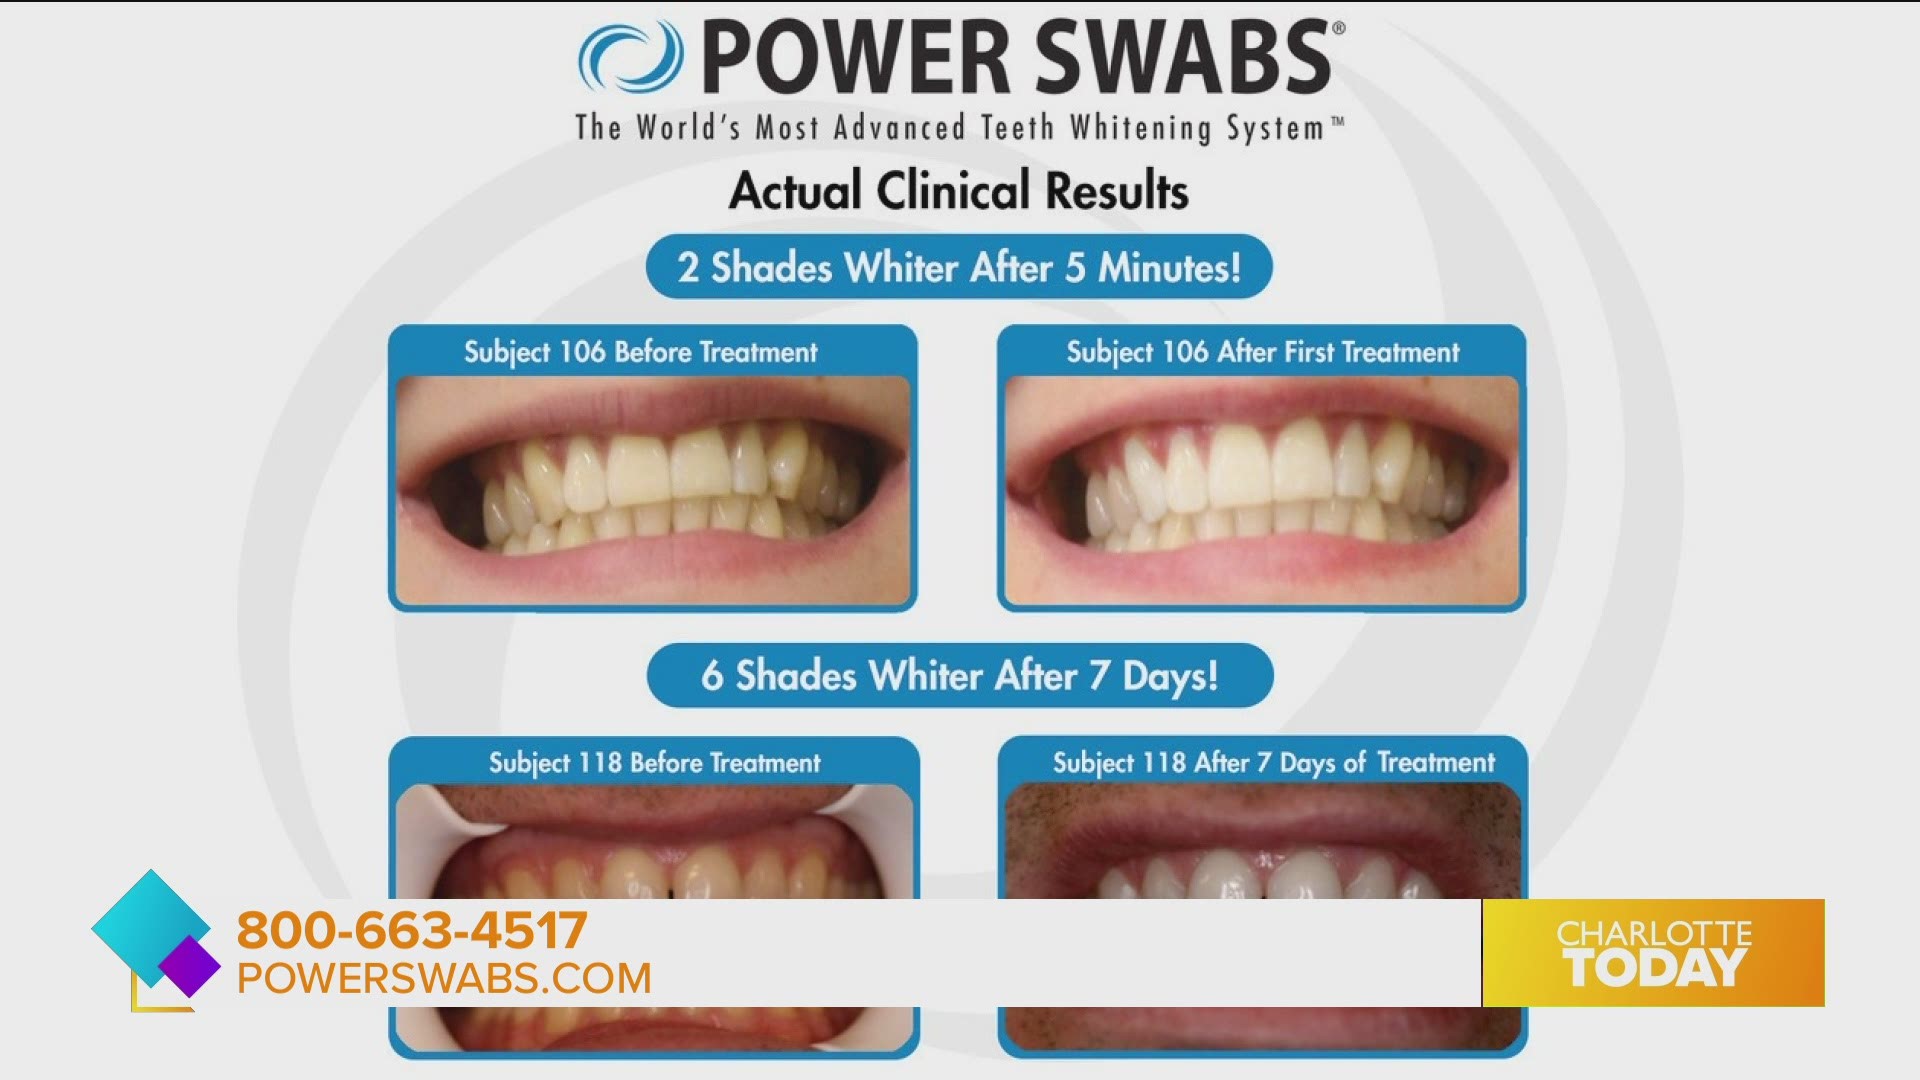 Get immediate results with Powerswabs